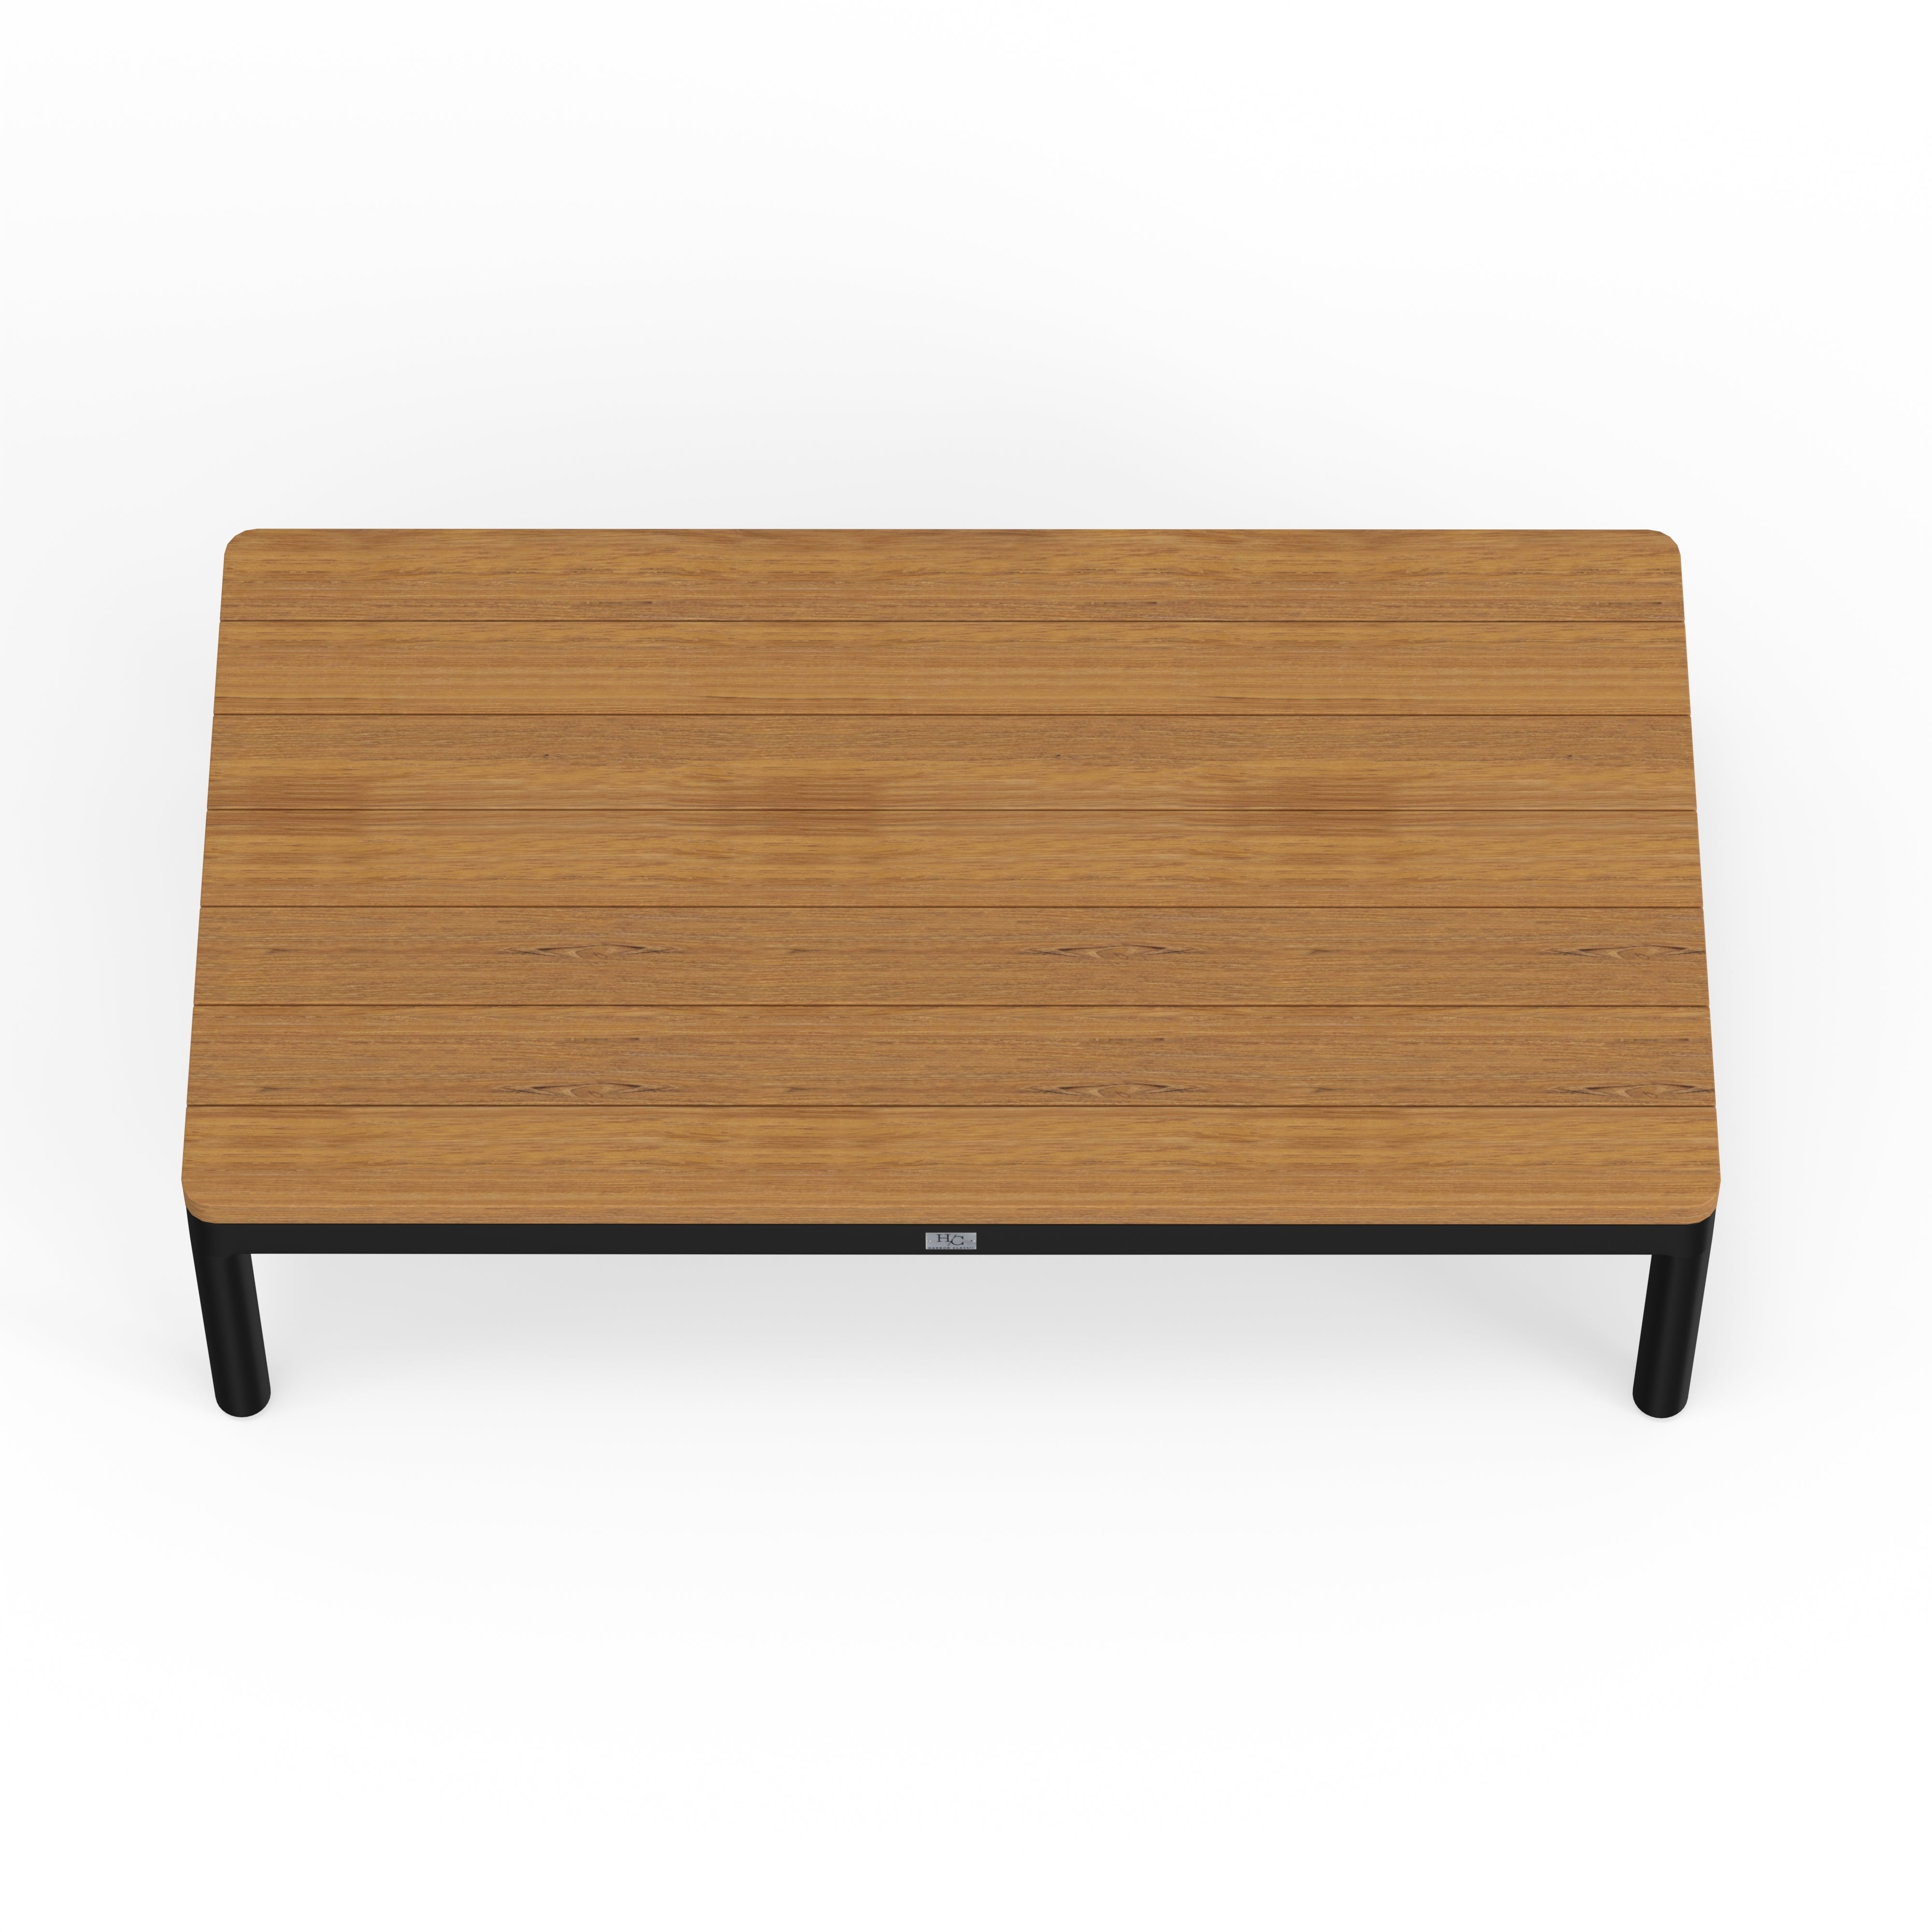 Perfect Coffee Table For Outdoors In Black